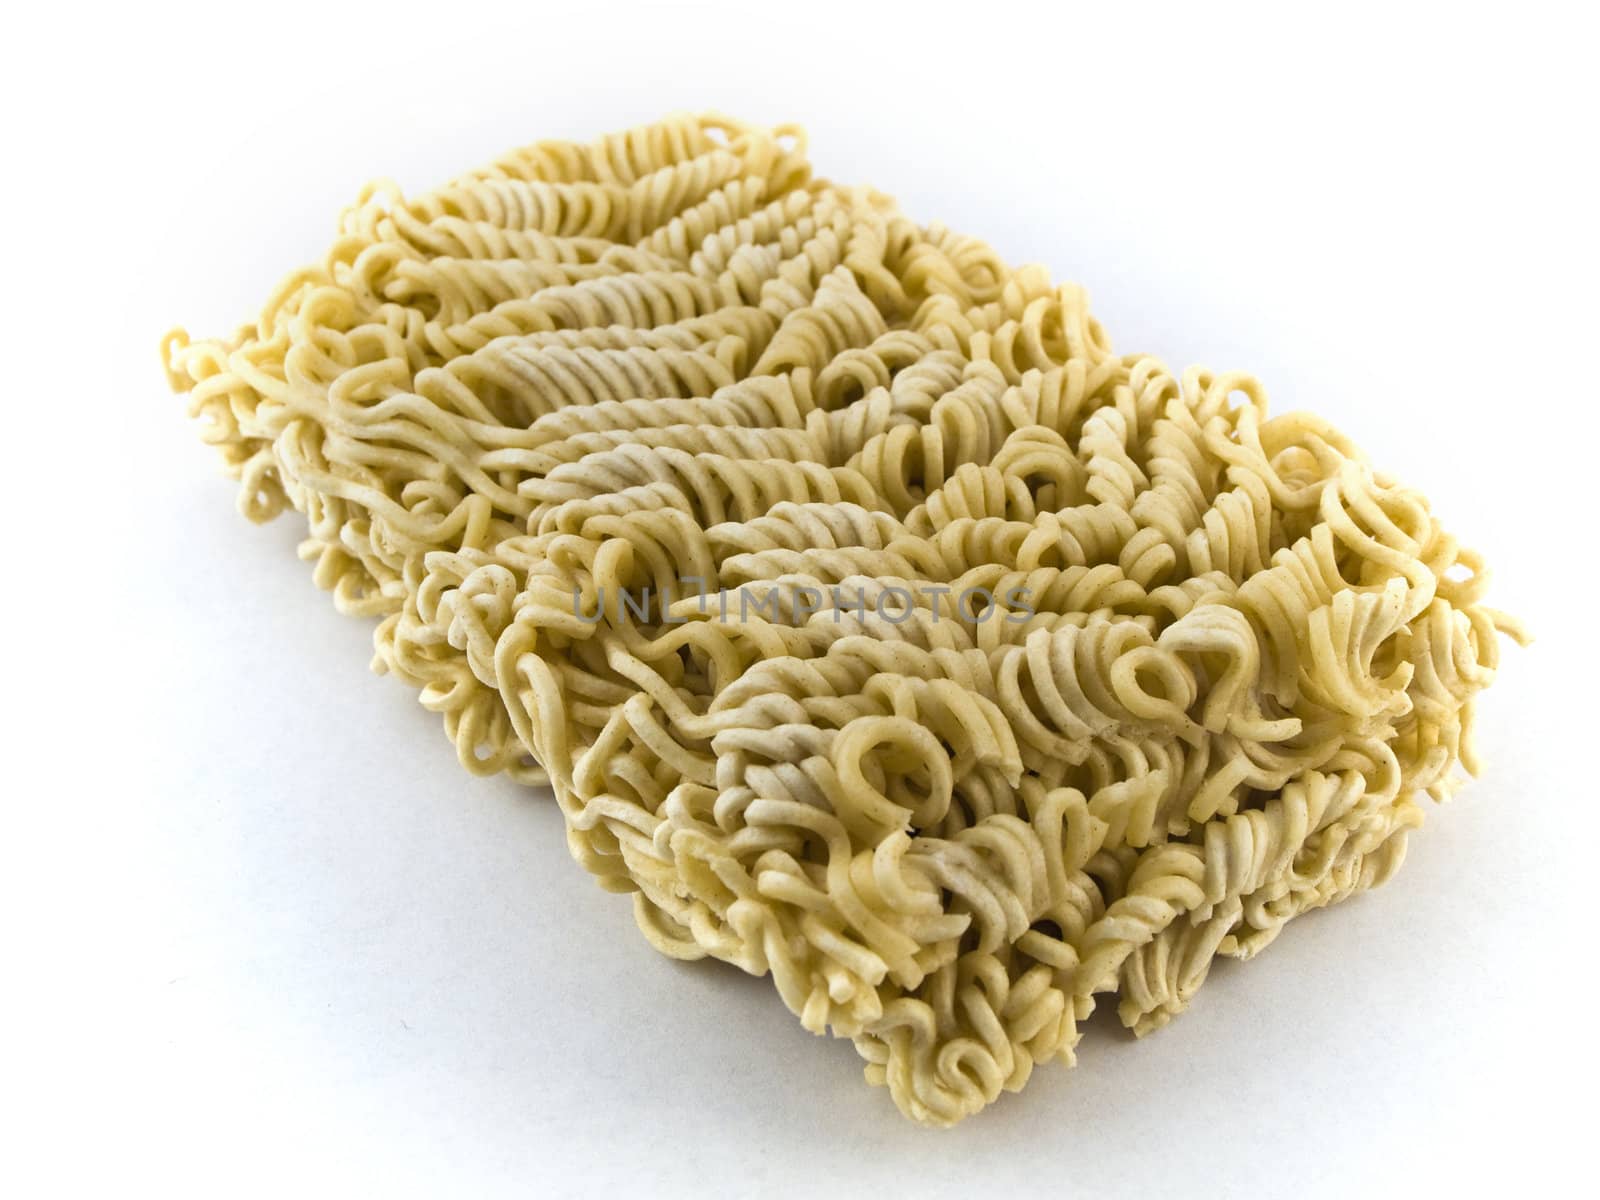 Dried Egg Noodles on White Background